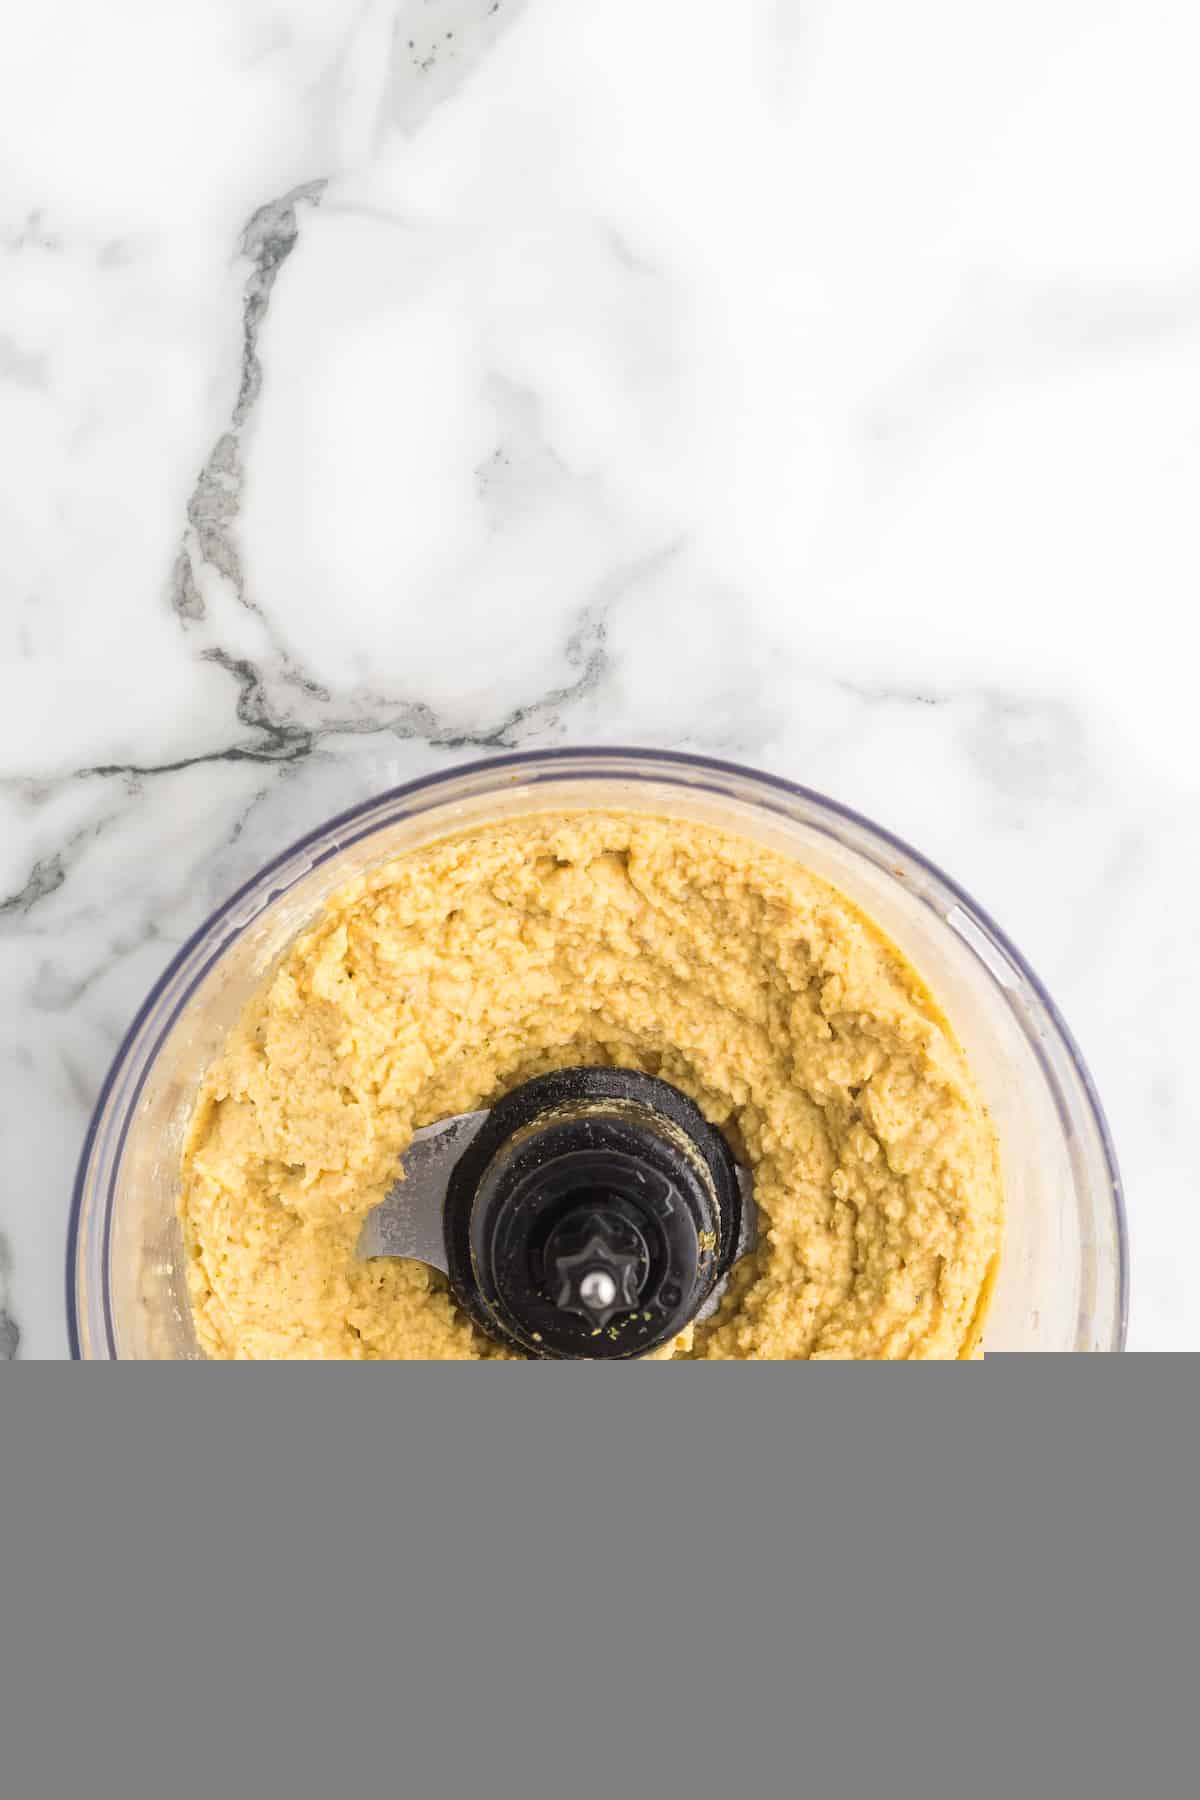 fresh garlic hummus blended in the bowl of the food processor.